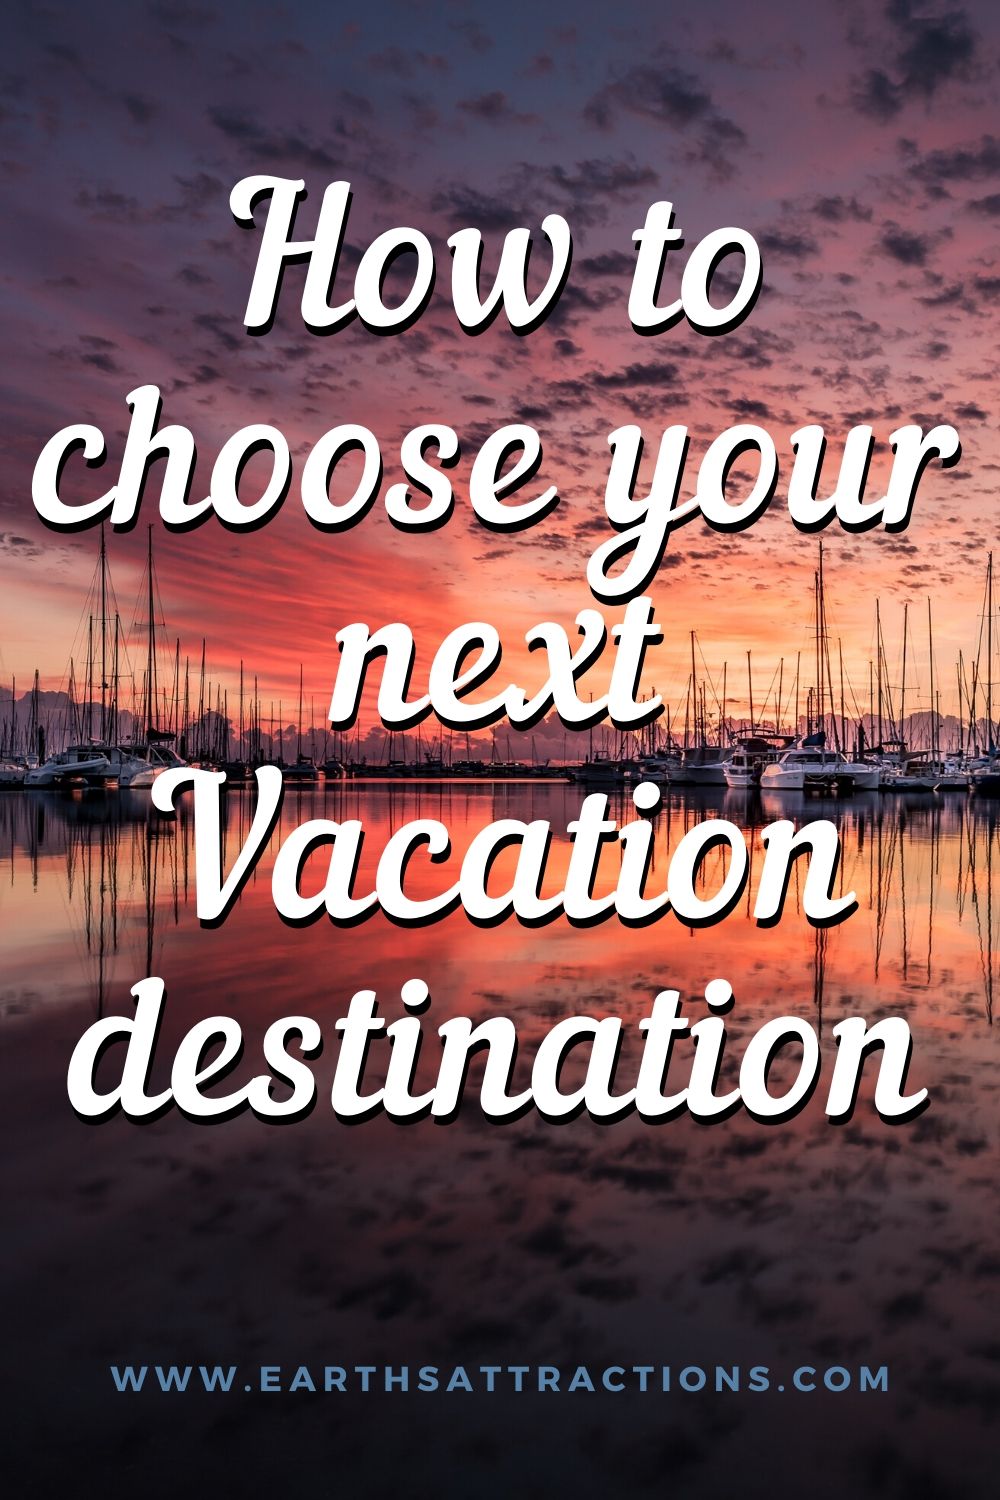 How to choose your next vacation destination. Discover how to choose your next travel destination and figure out where to go next. #travel #traveltips #traveldestinations #travelplans #earthsattractions